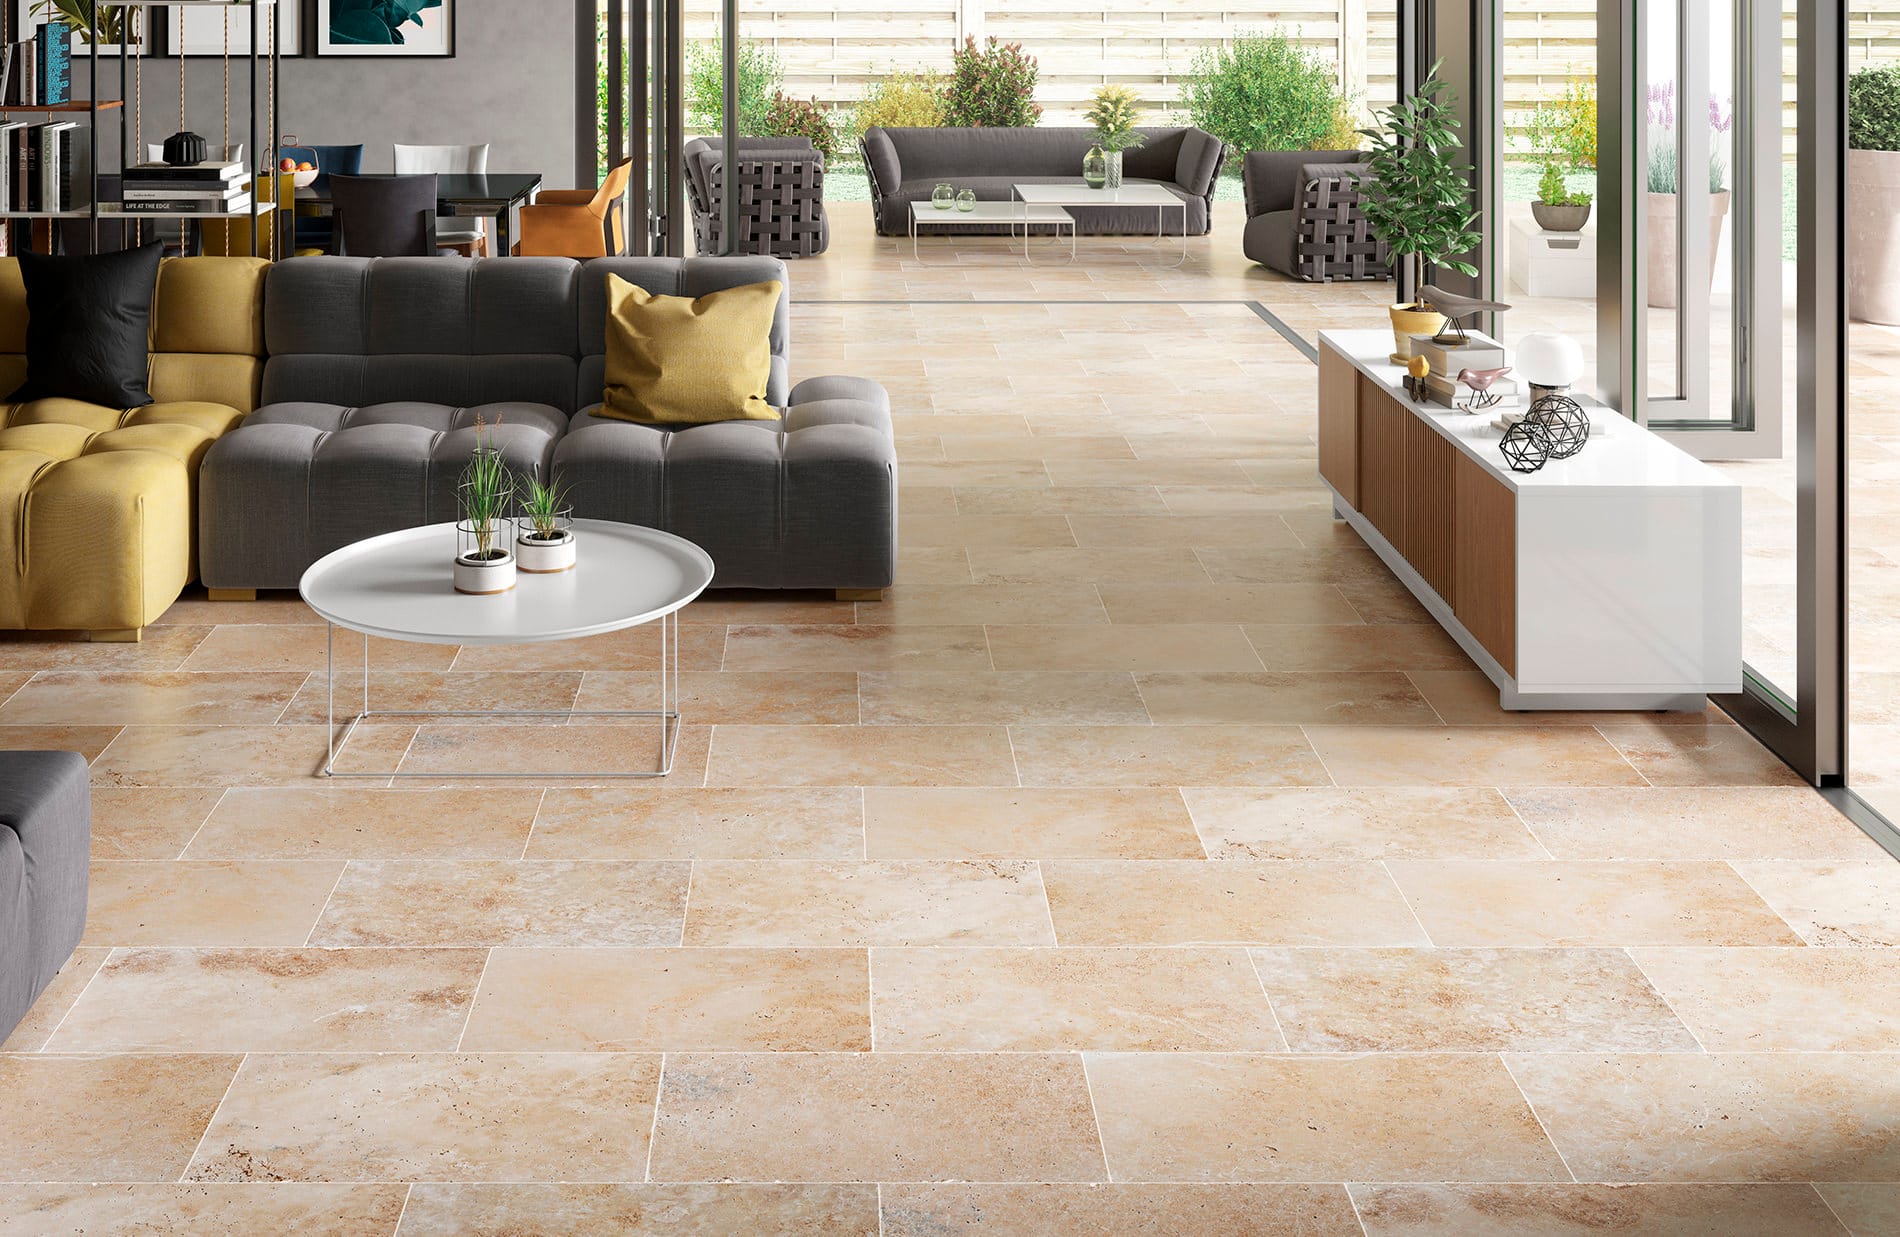 Tercocer. Travertine. Ambiente 3D.